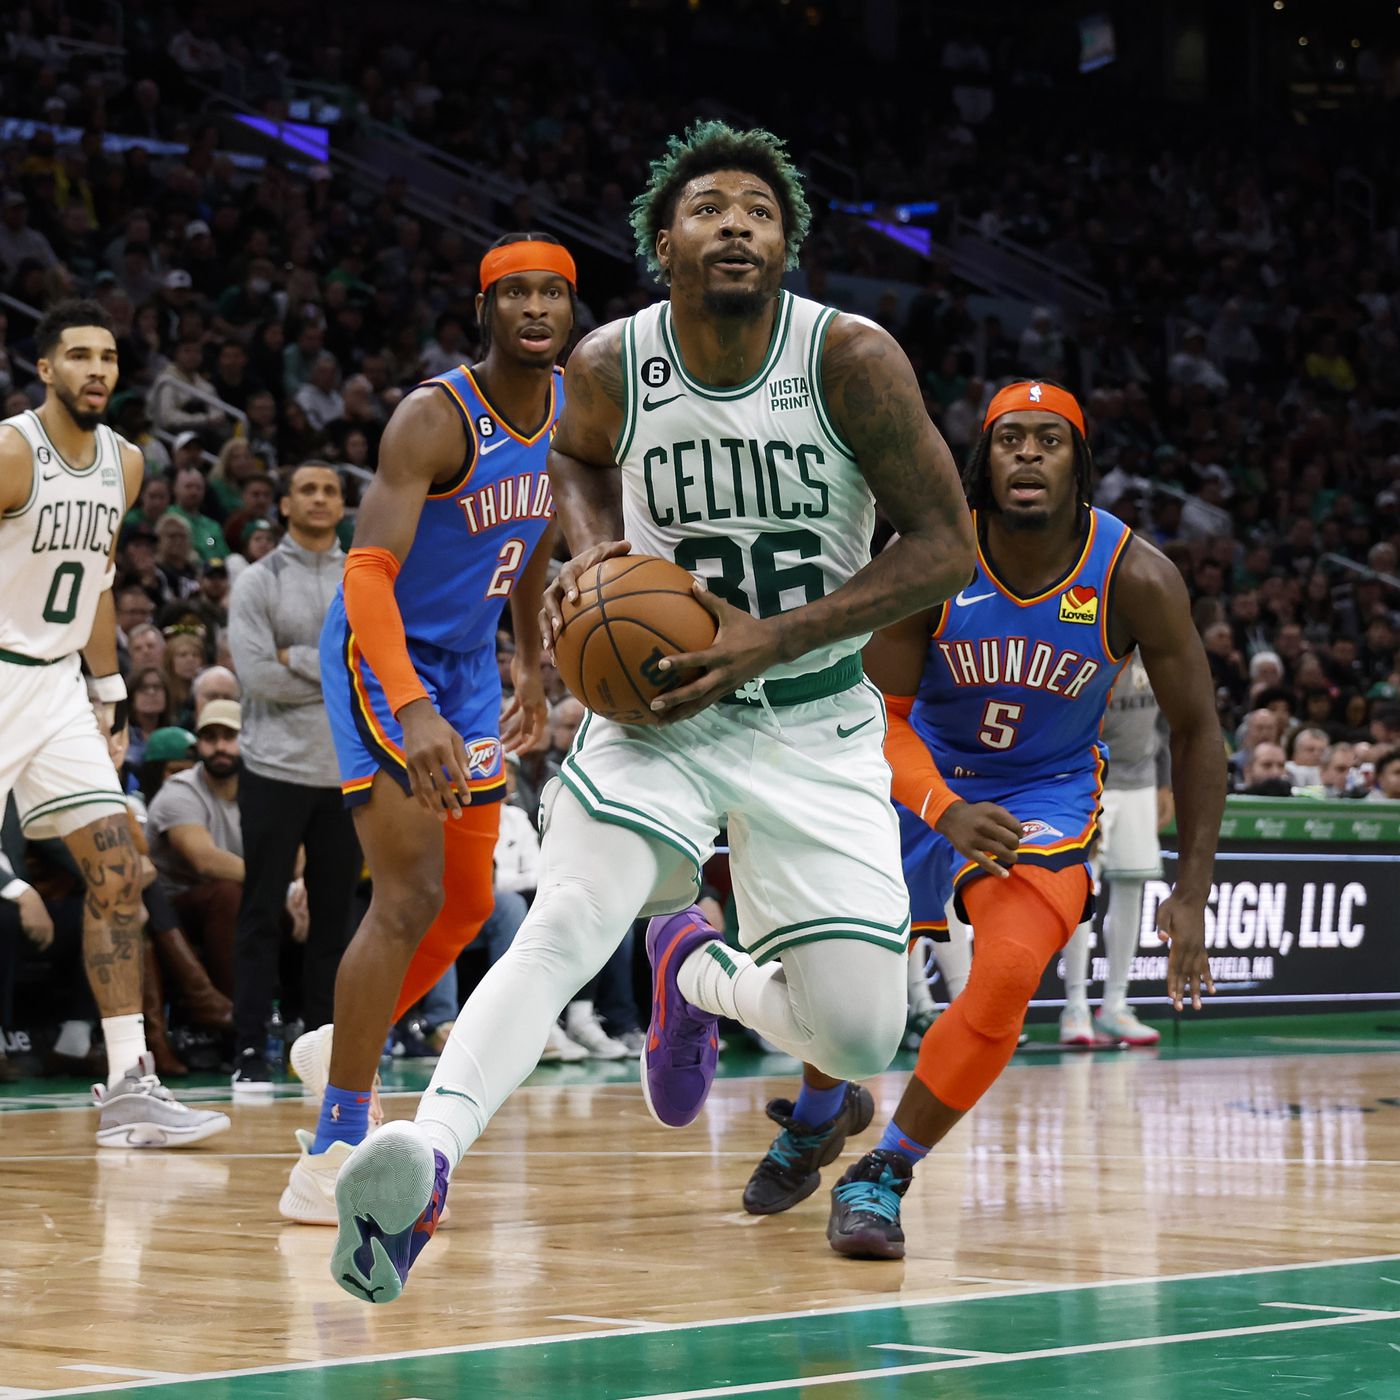 Celtics rebound vs. quality opponent with win